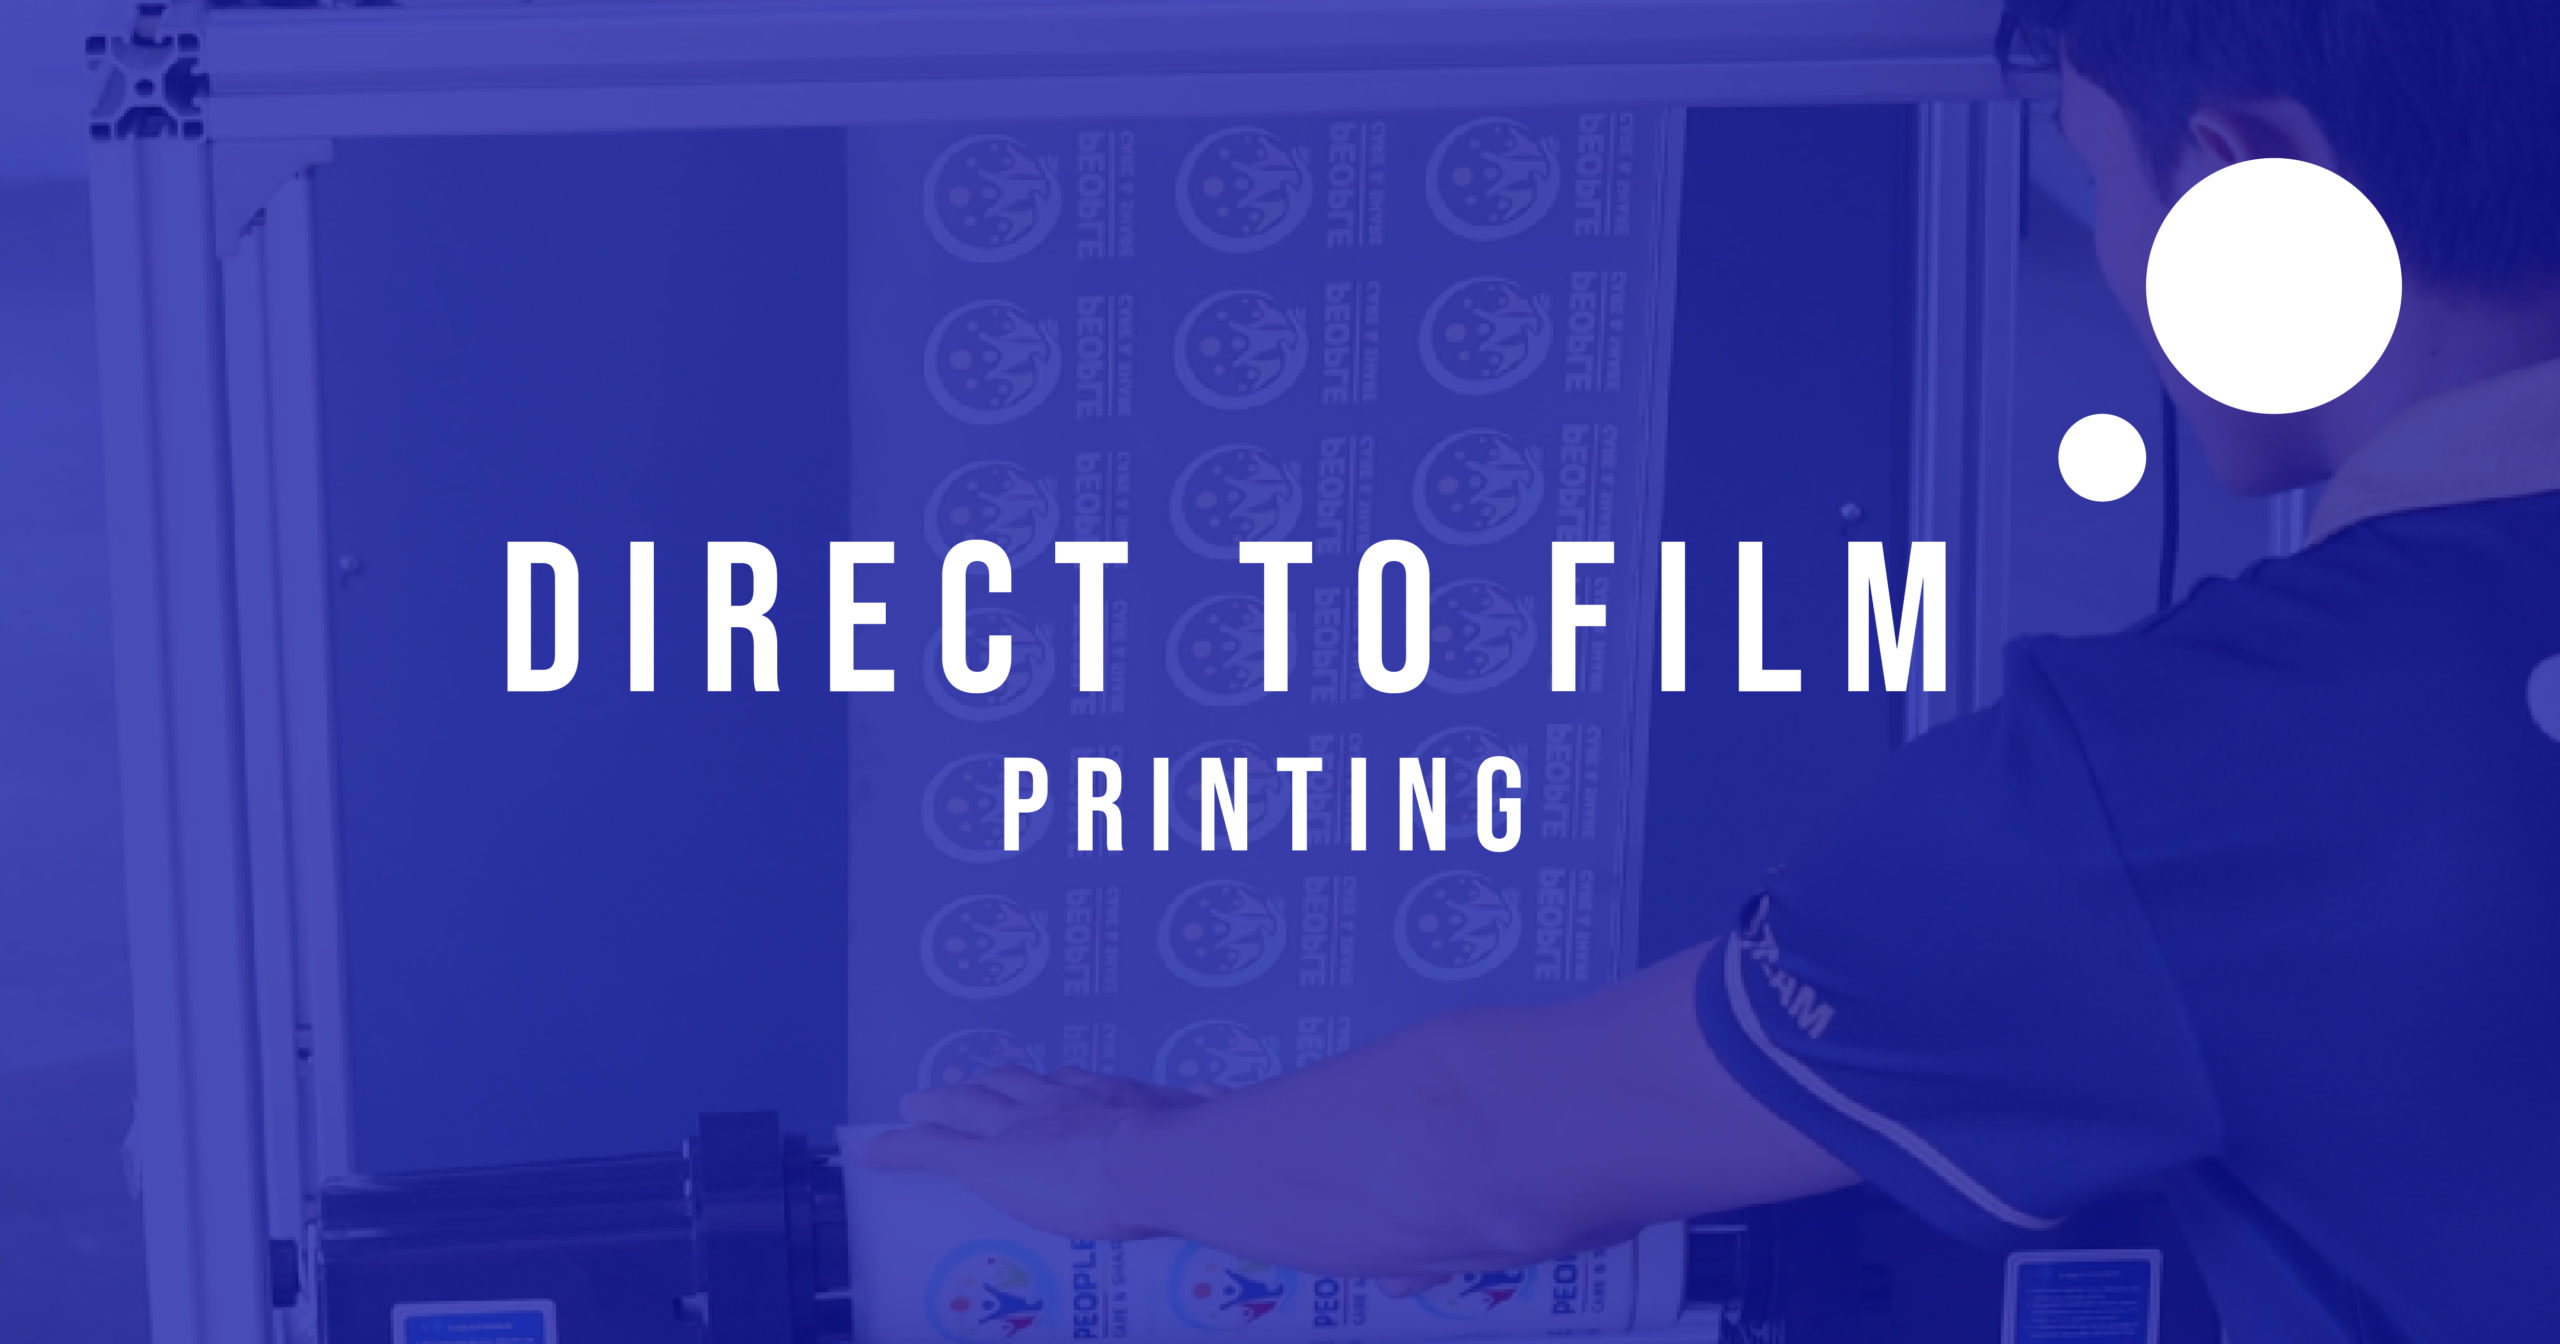 Direct-to-Film Printing